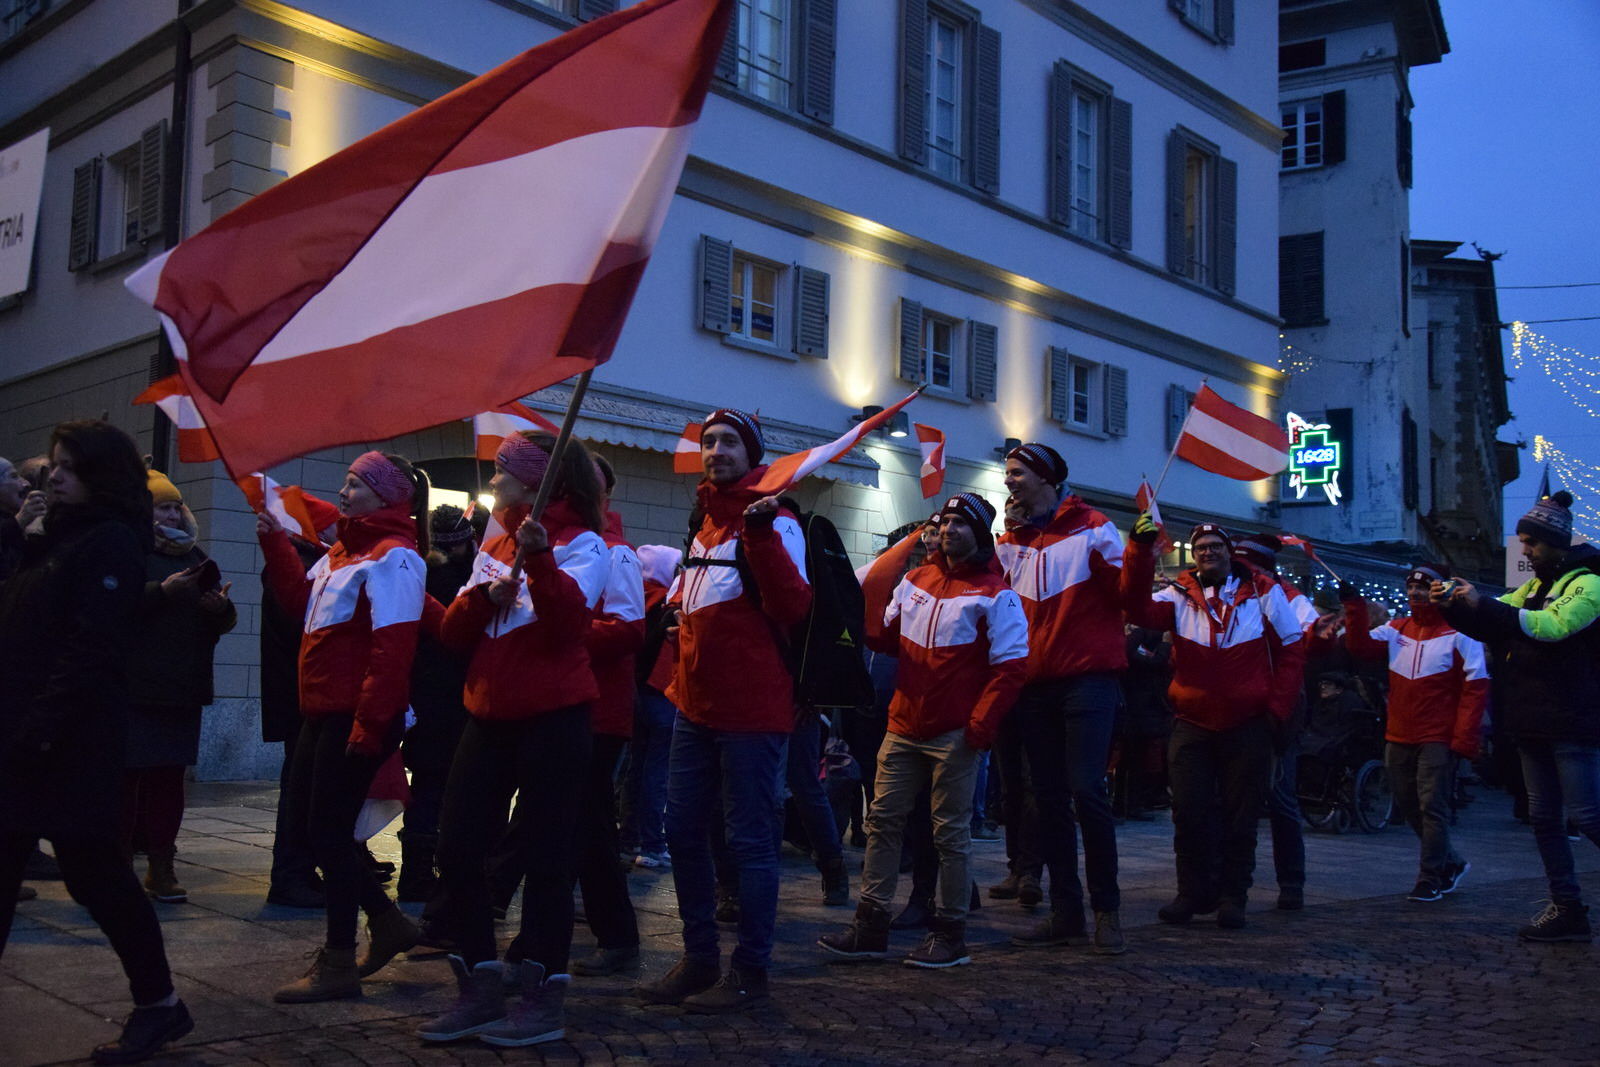 The participating nations in the Winter Deaflympics paraded through the streets of Sondrio for the Opening Ceremony ©Deaflympics